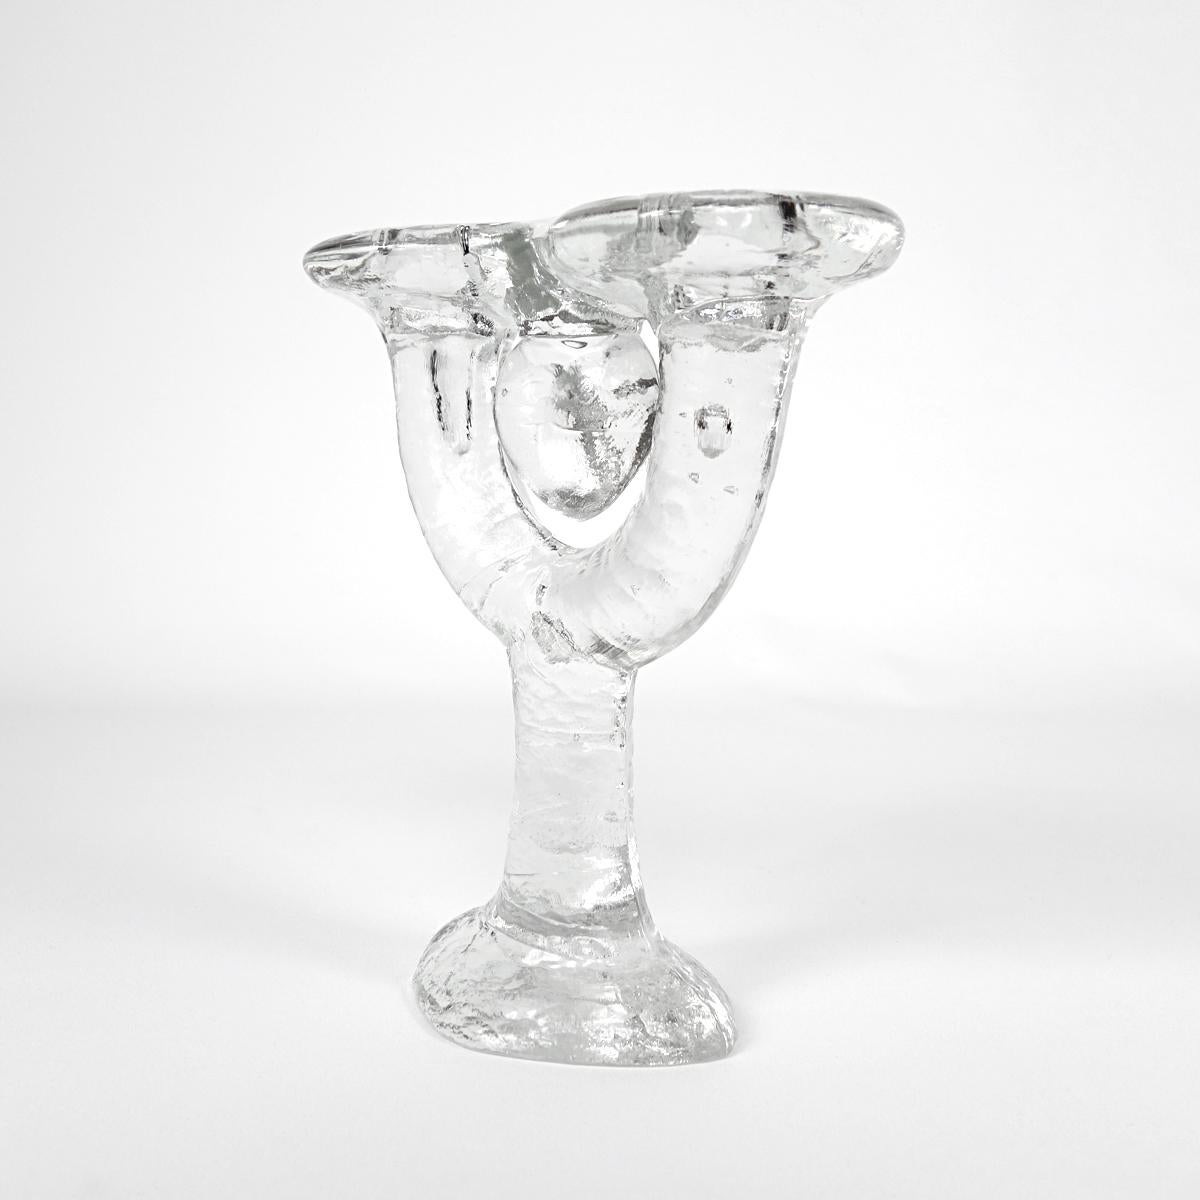 20th Century Mid-Century Modern Two-Armed Candlestick by Timo Sarpaneva for Iittala For Sale